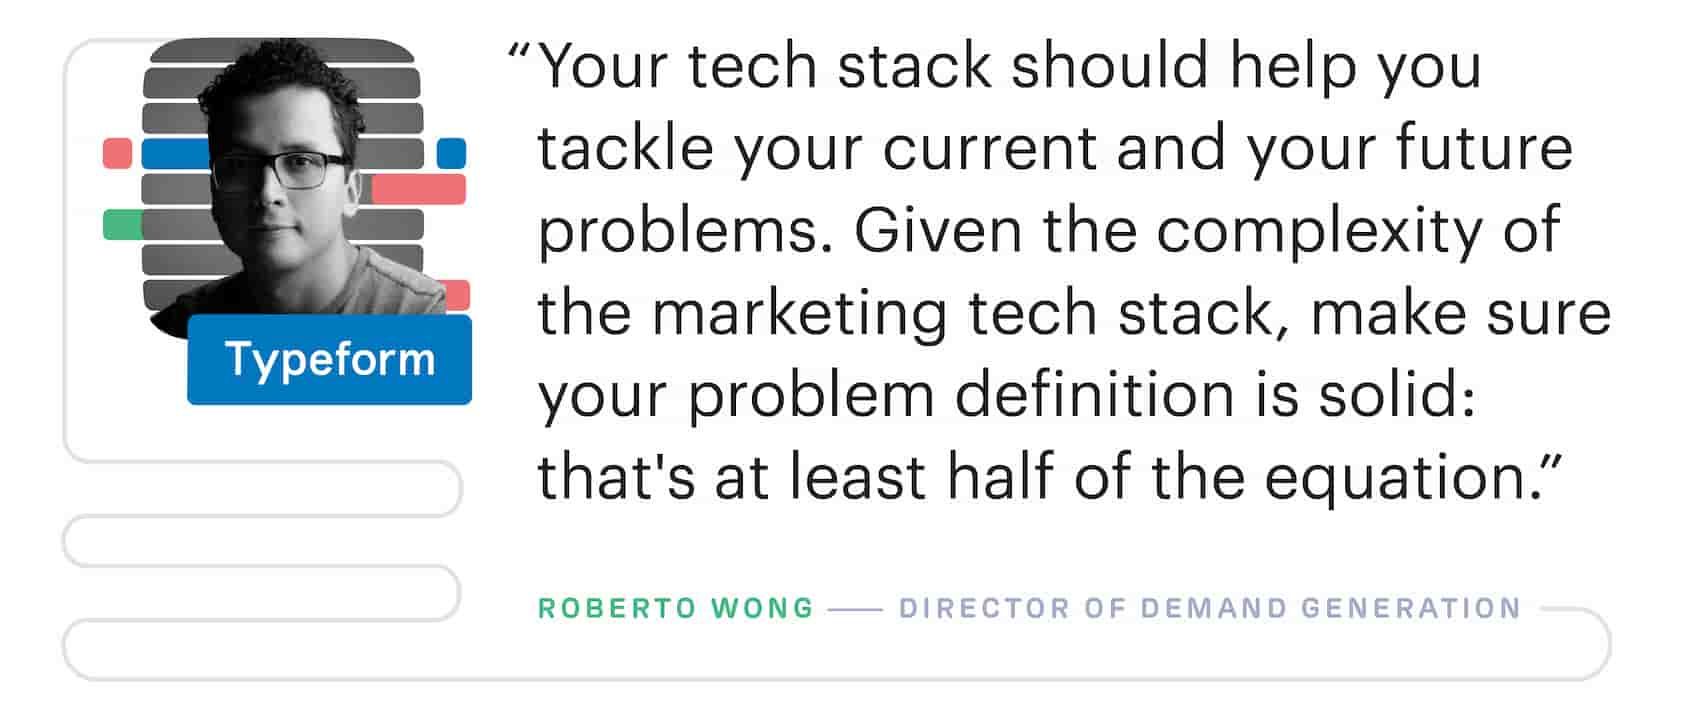 "Your martech stack should help you tackle your current and your future problems. Given the complexity of the marketing tech stack, make sure your problem definition is solid: that's at least half of the equation." – Roberto Wong, Director of Demand Generation at Typeform